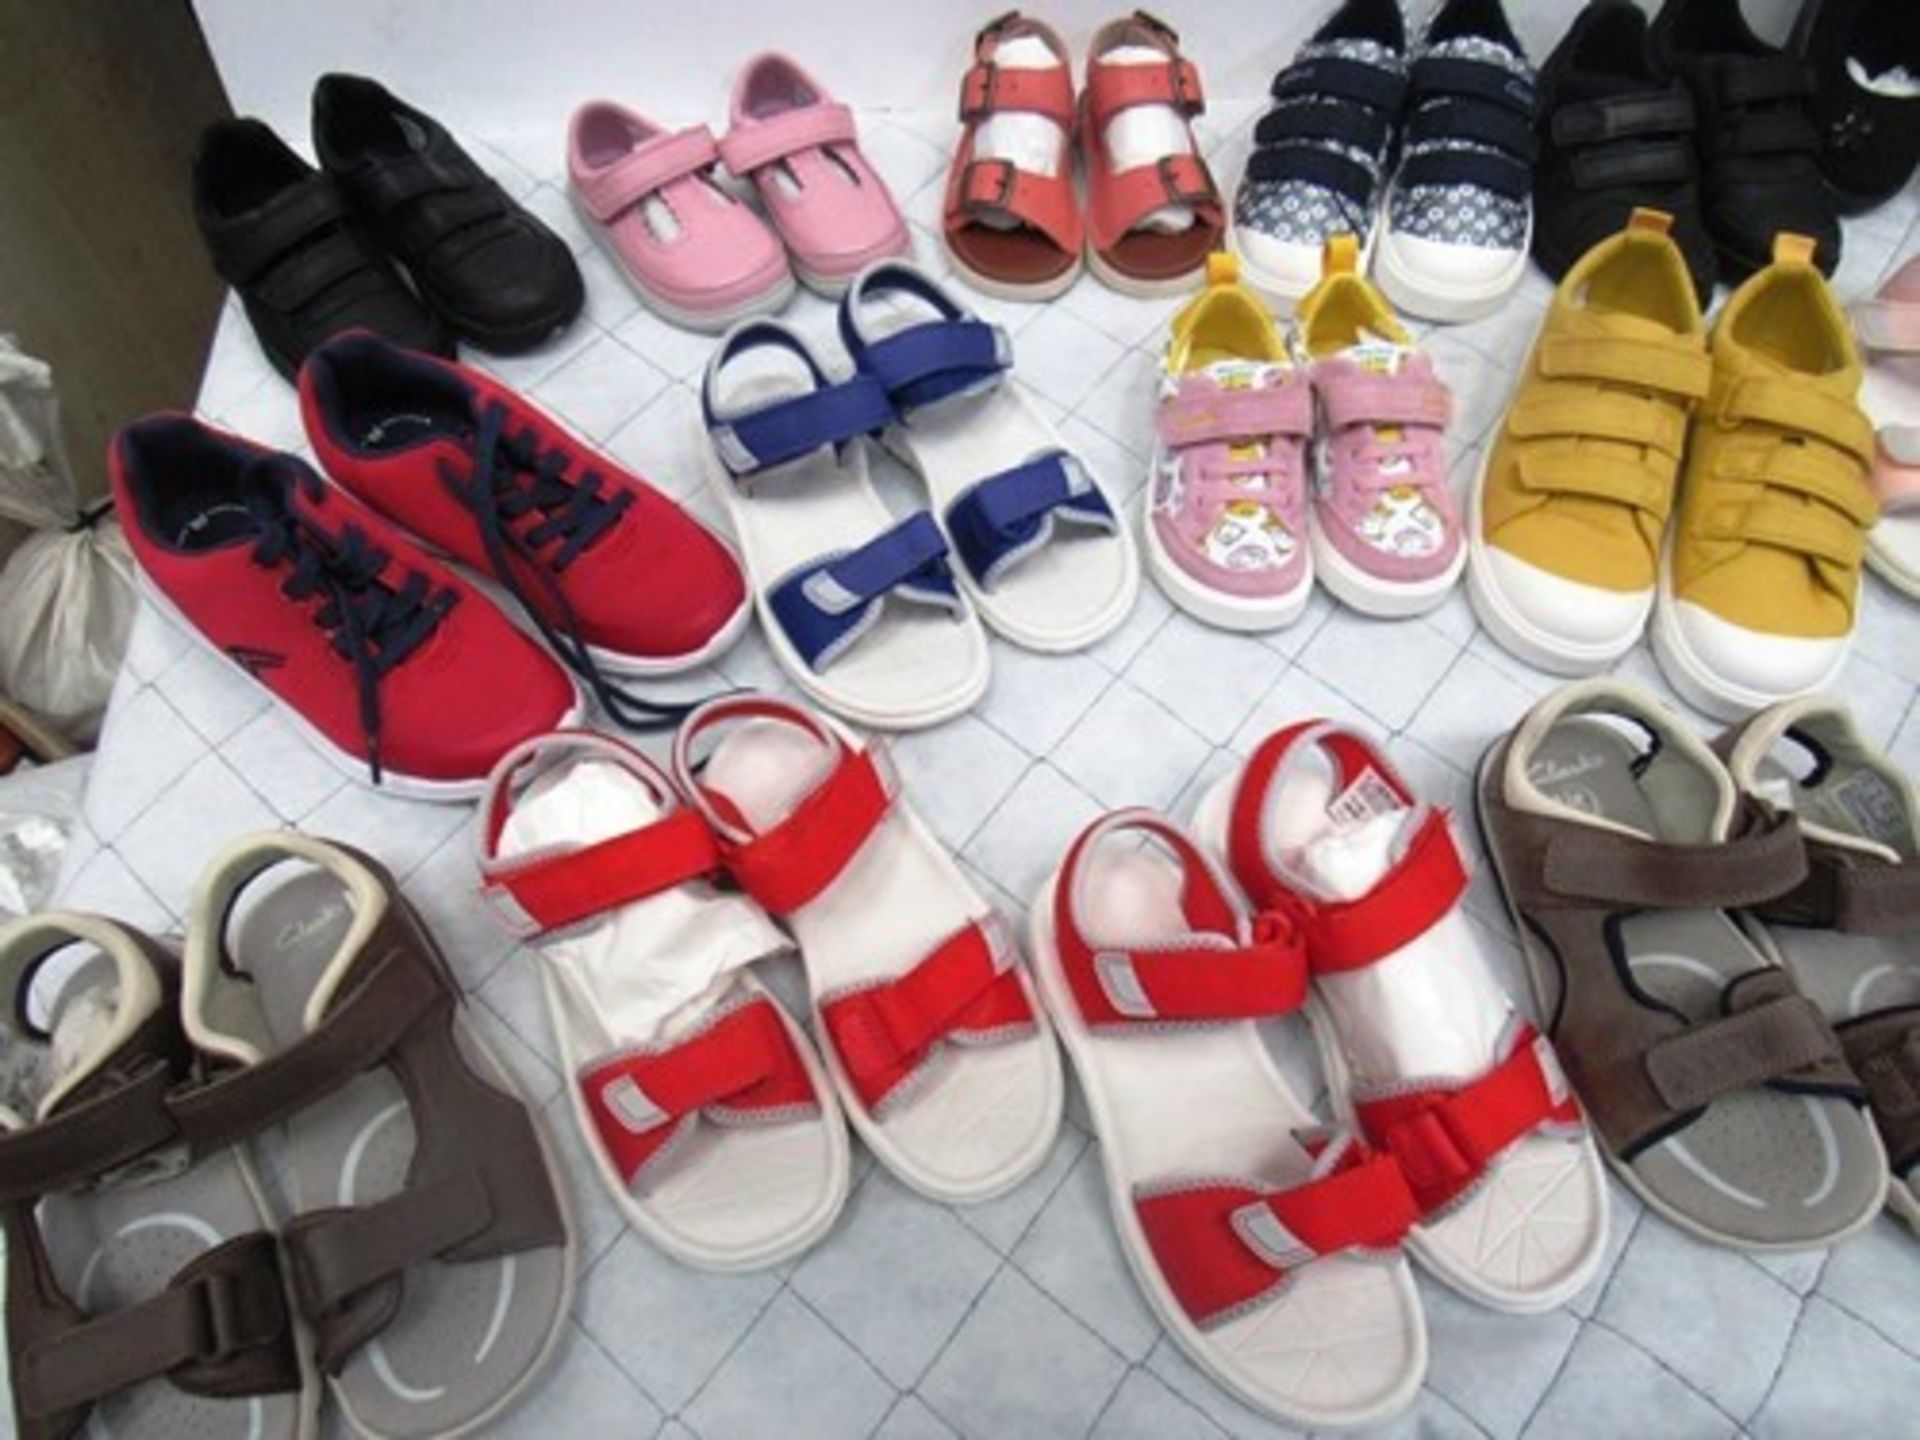 20 x pairs of children's Clark shoes and sandals in assorted styles and sizes - New (ES15)